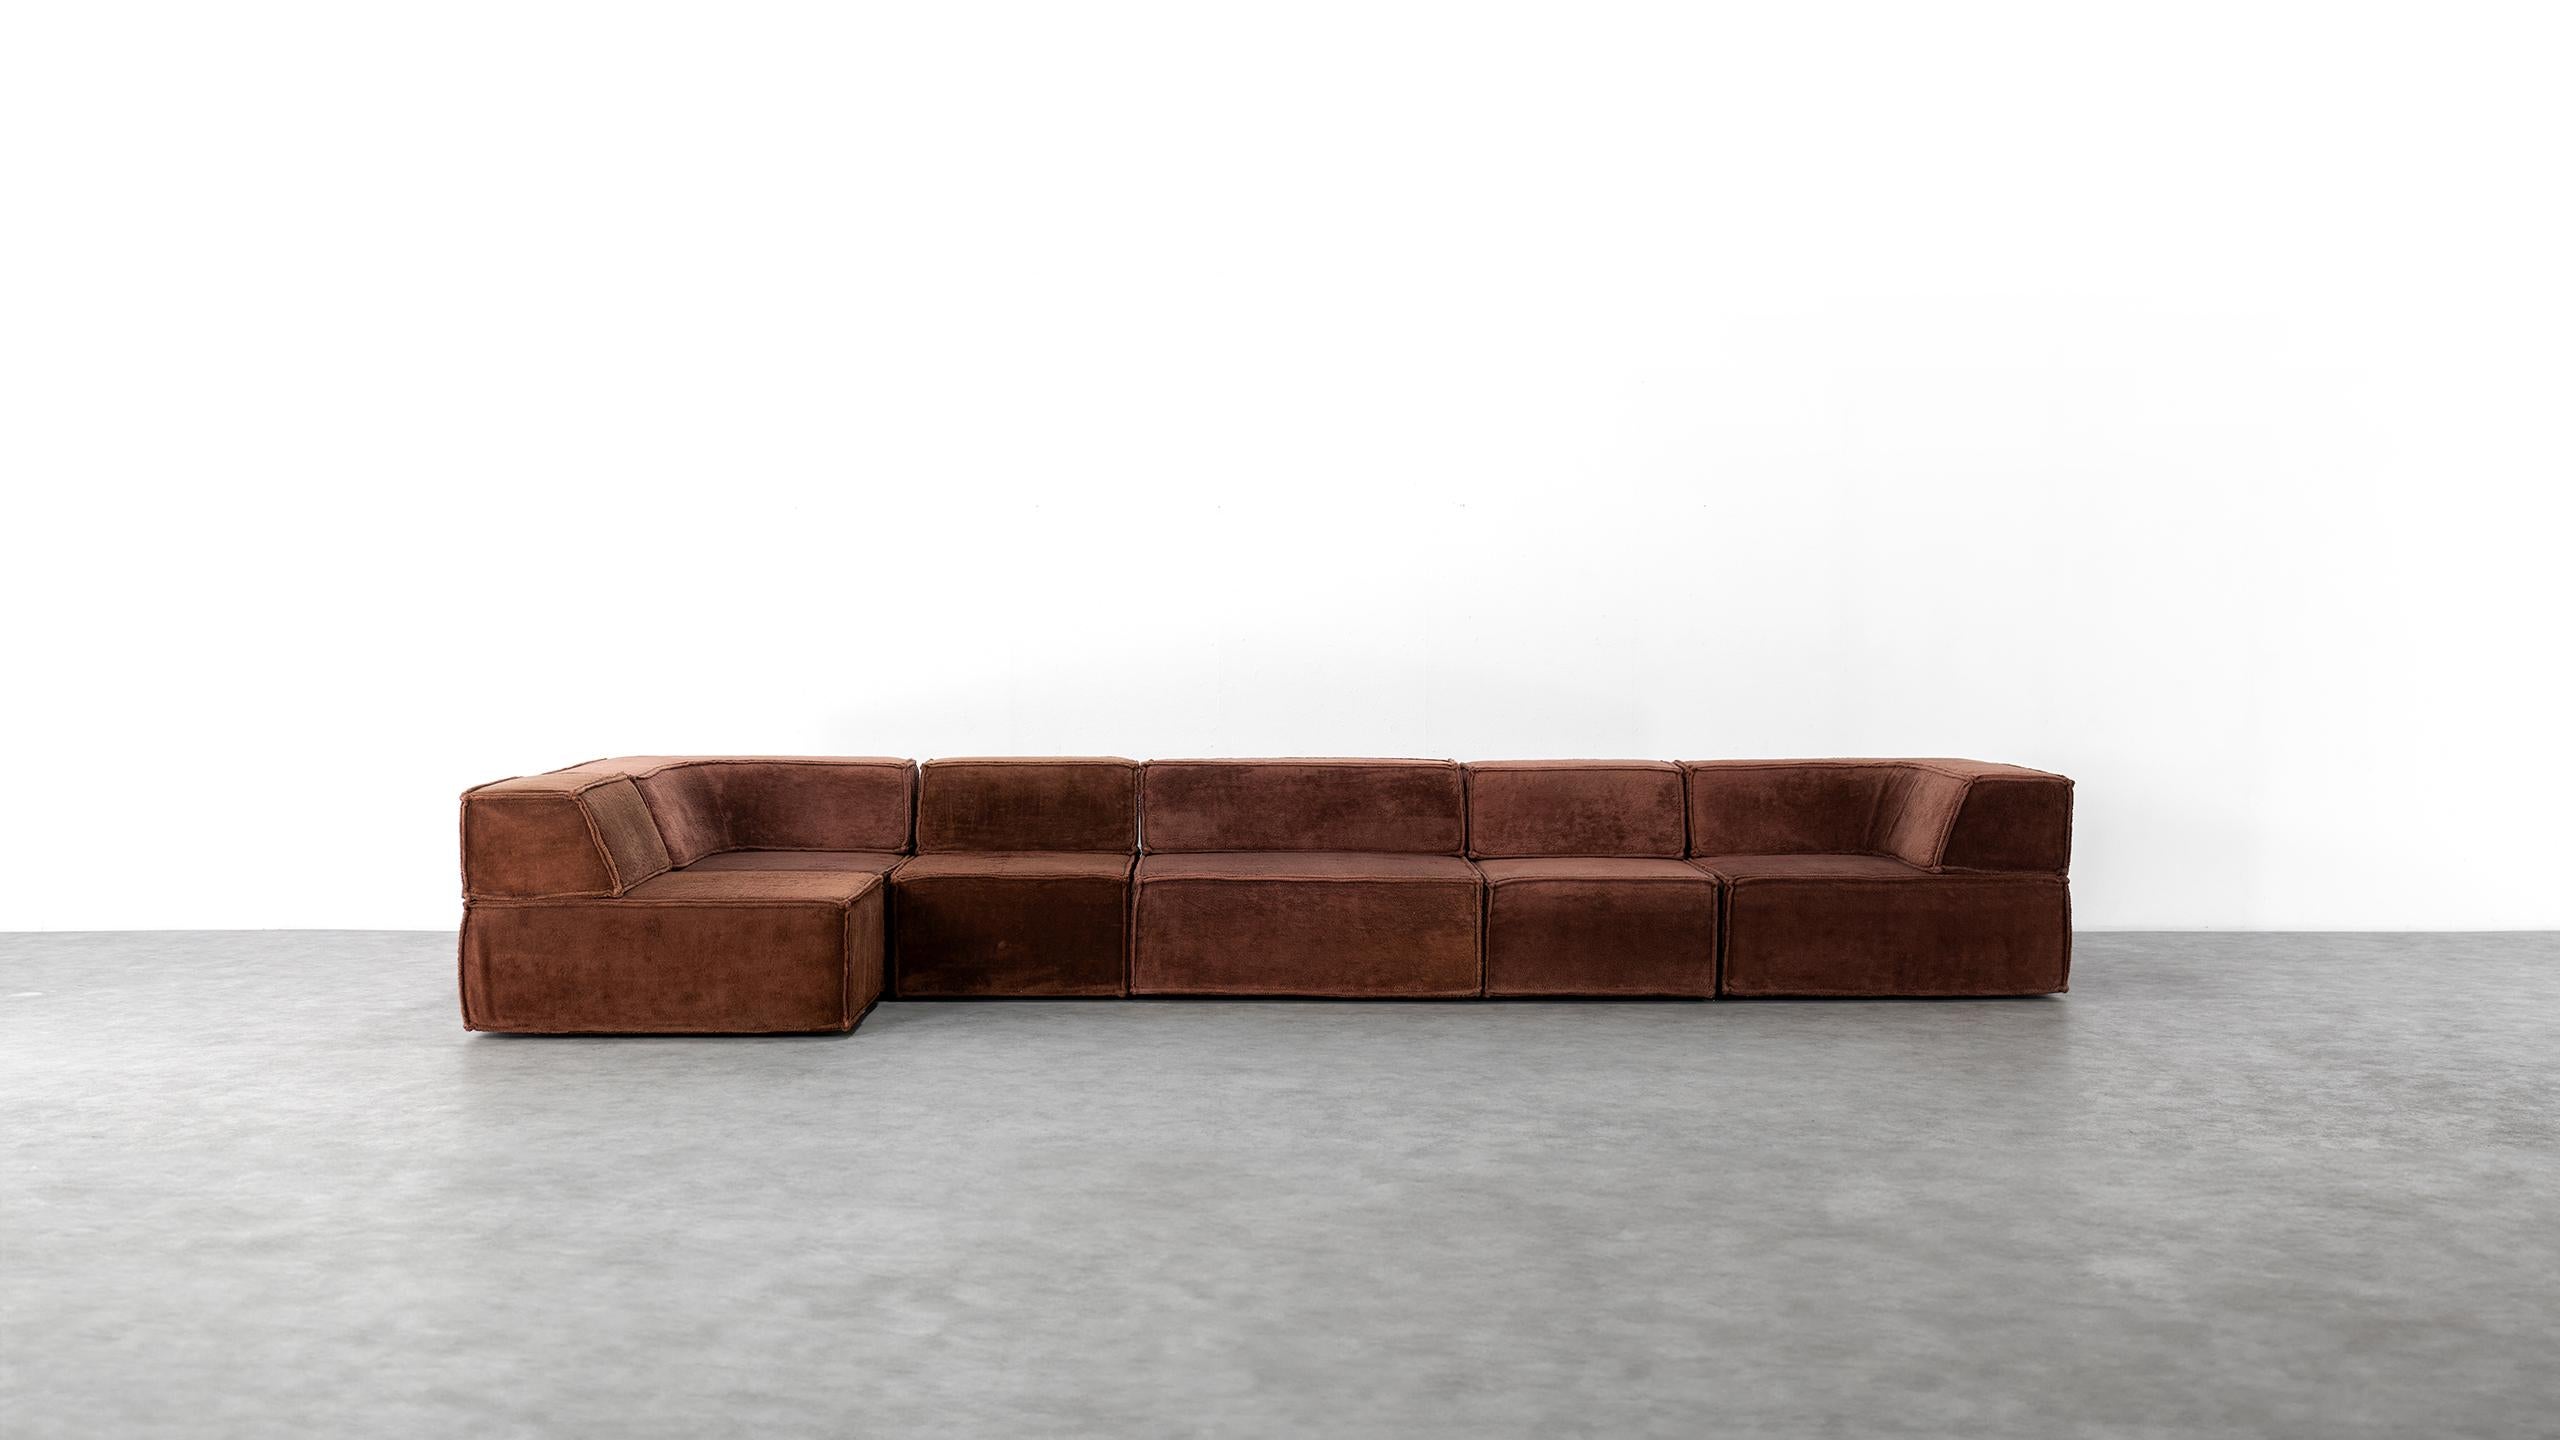 COR trio modular sofa, huge living area in its original chocolate-brown teddy fabric - designed in 1972 by Franz Hero and Karl Odermatt Team Form Ag, Switzerland.

The modular sofa system, designed in 1972 by Team Form AG in Switzerland for